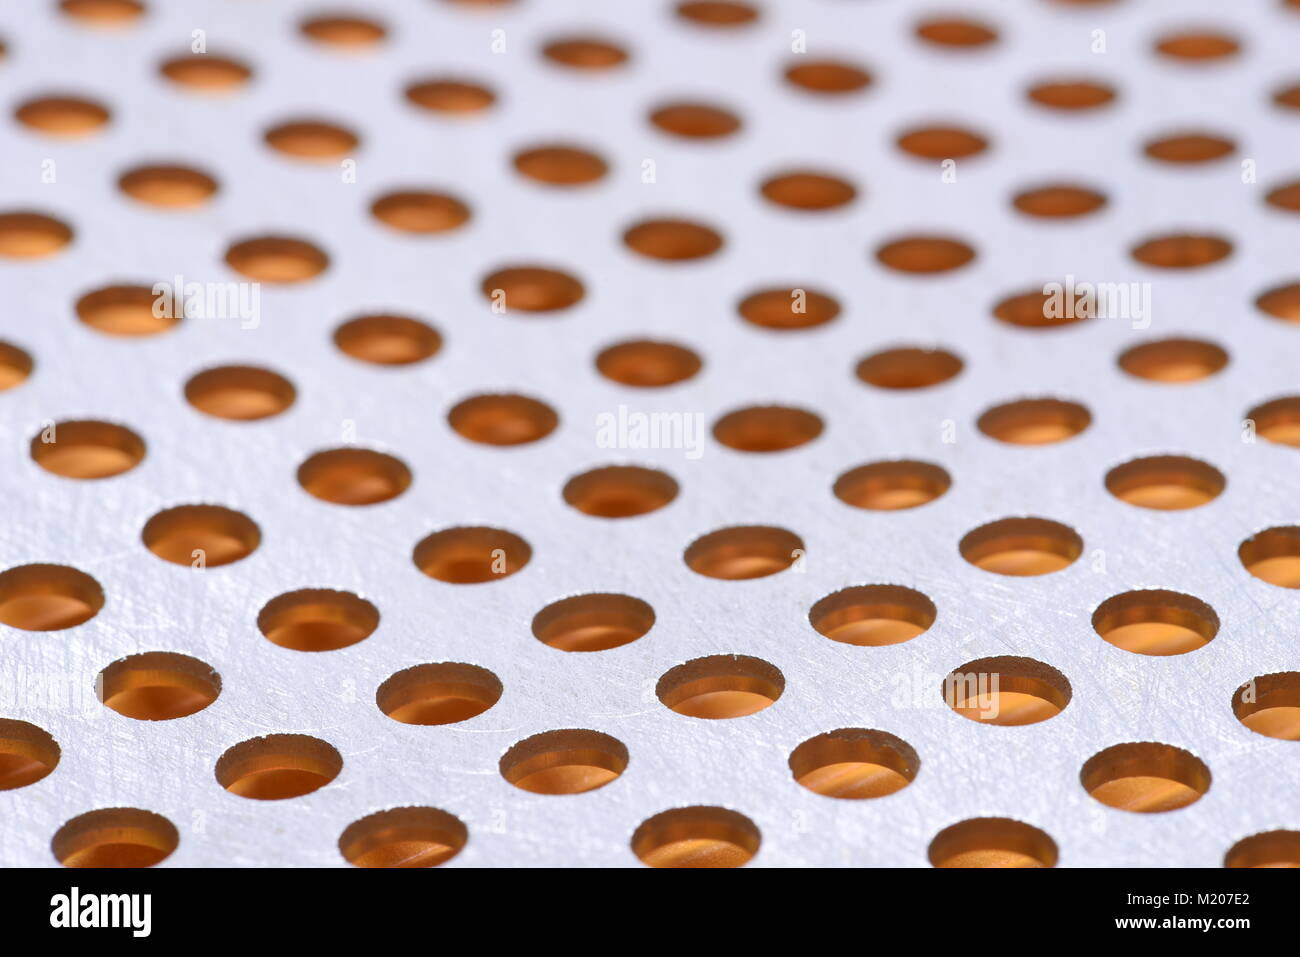 Abstract background of metal surface with holes Stock Photo